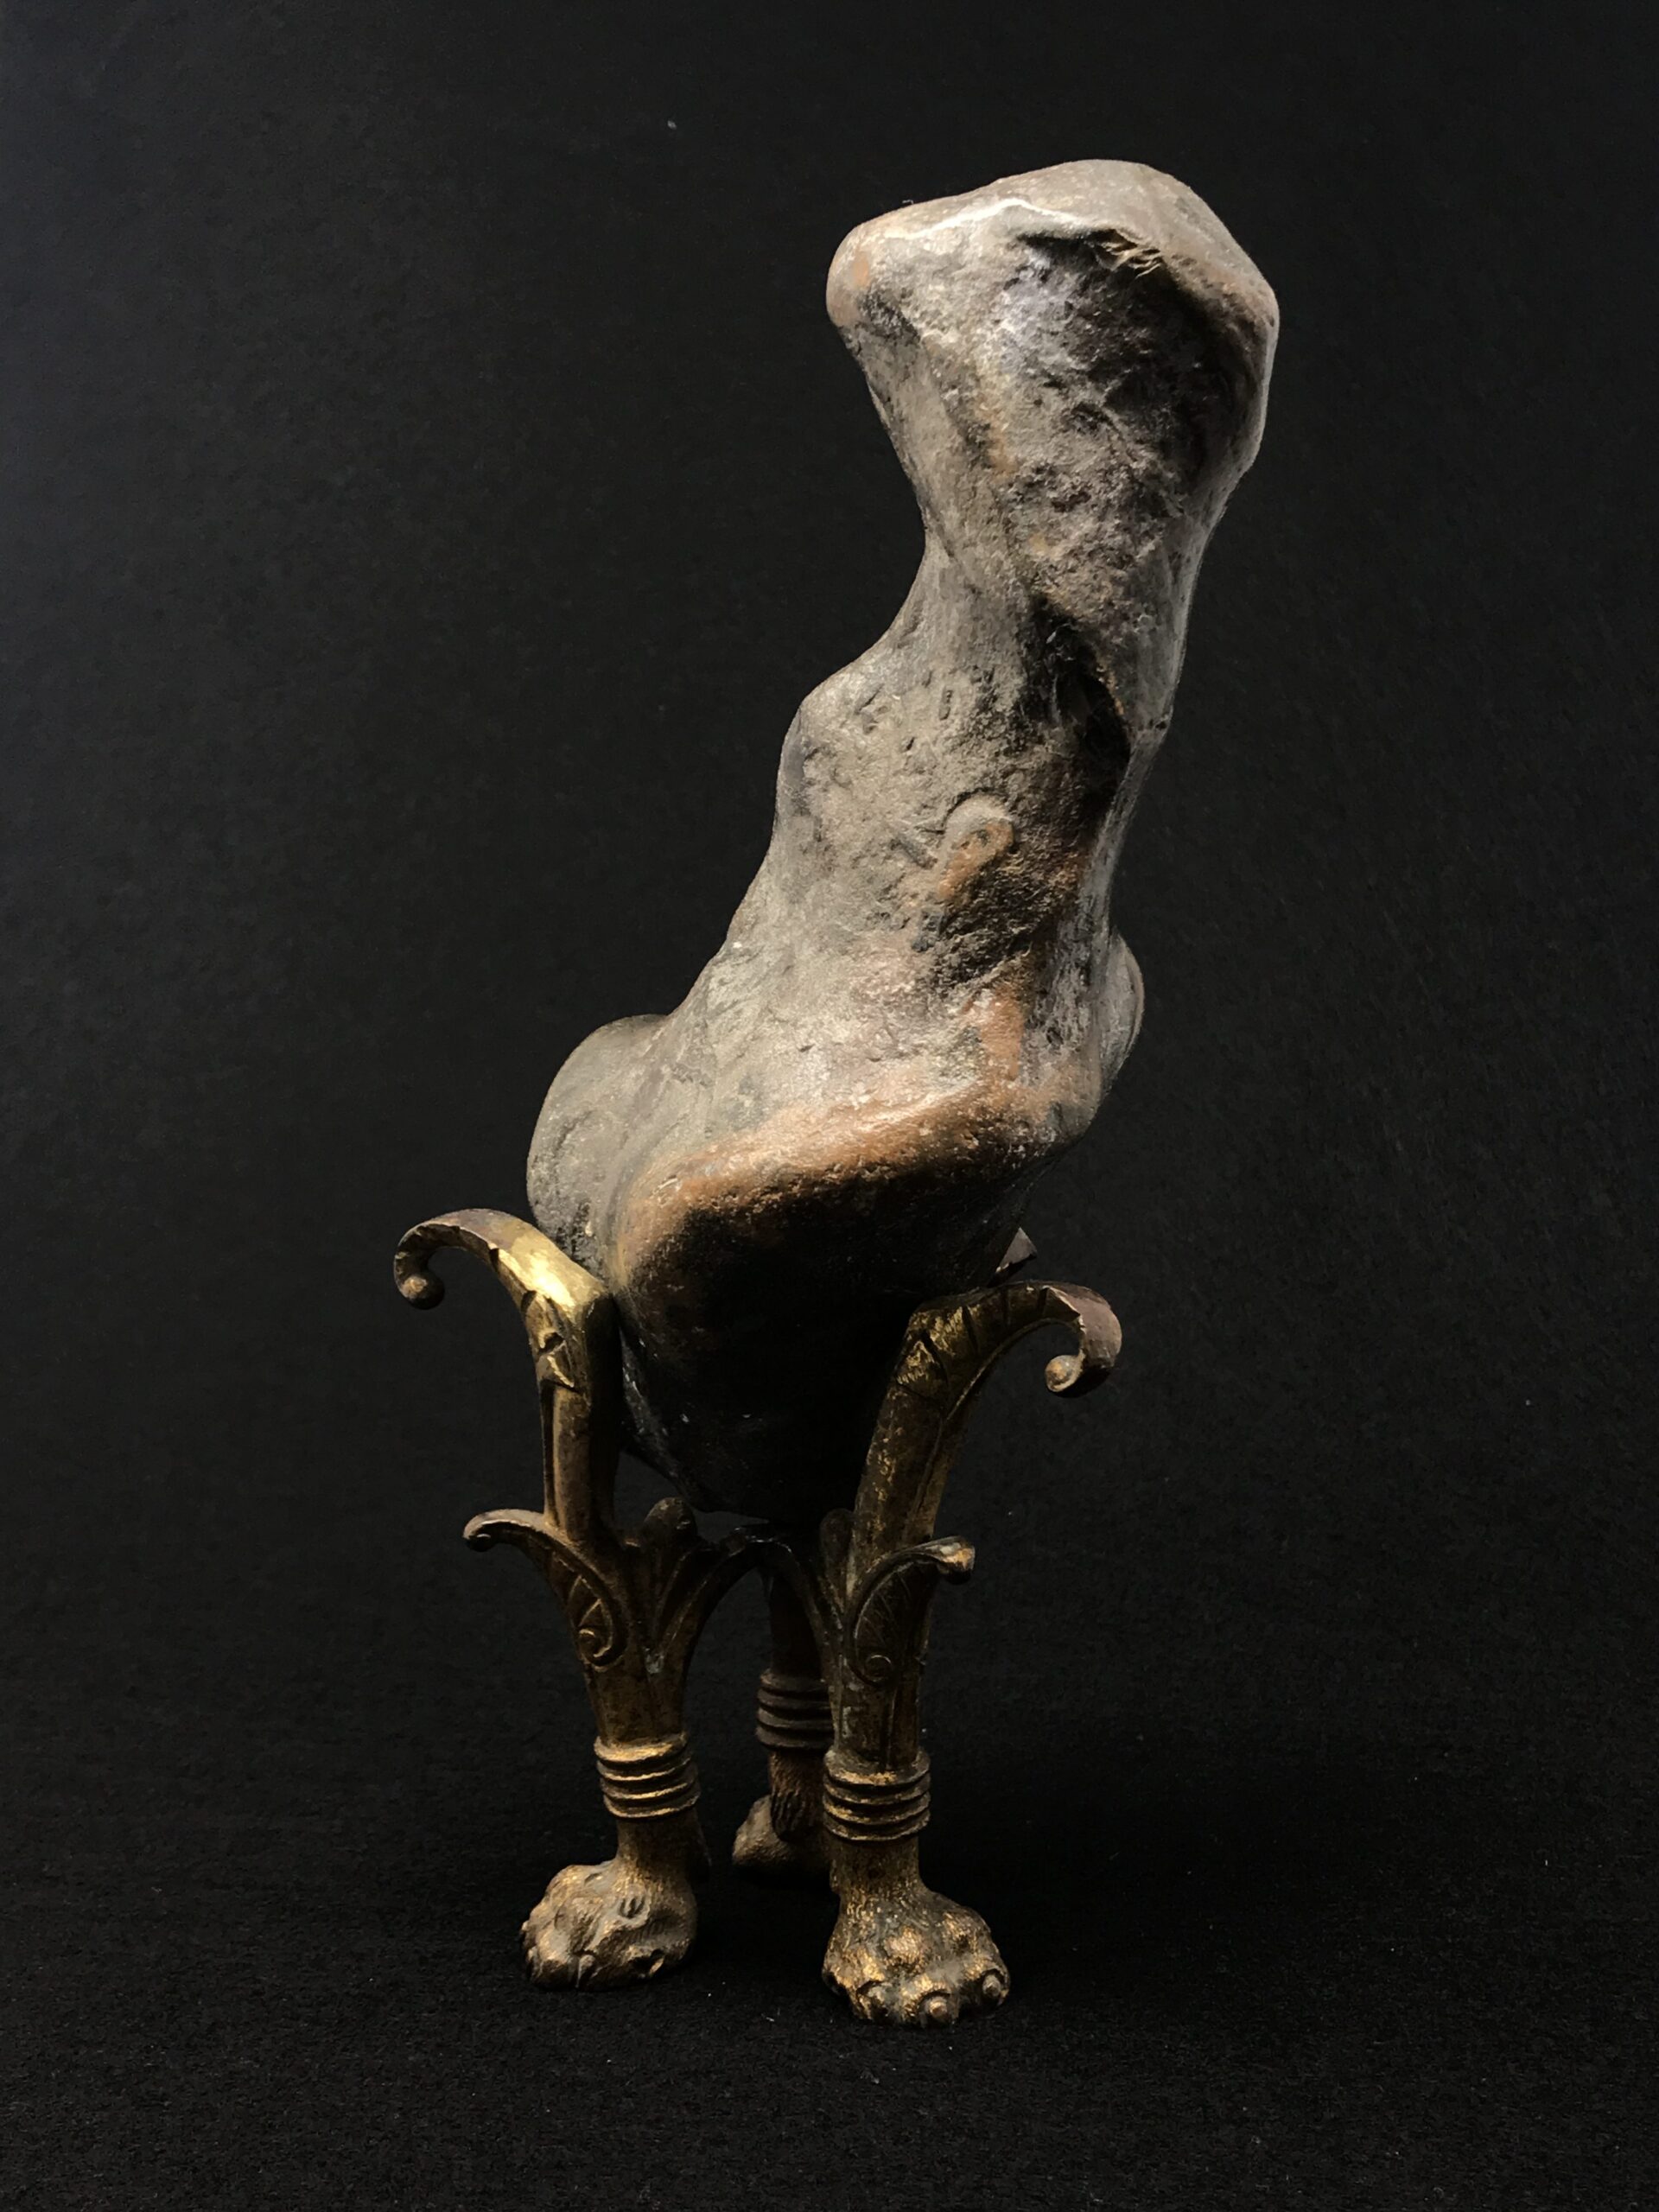 Collecting: a rock creature peers out of the gloom from his ornate gilded legs